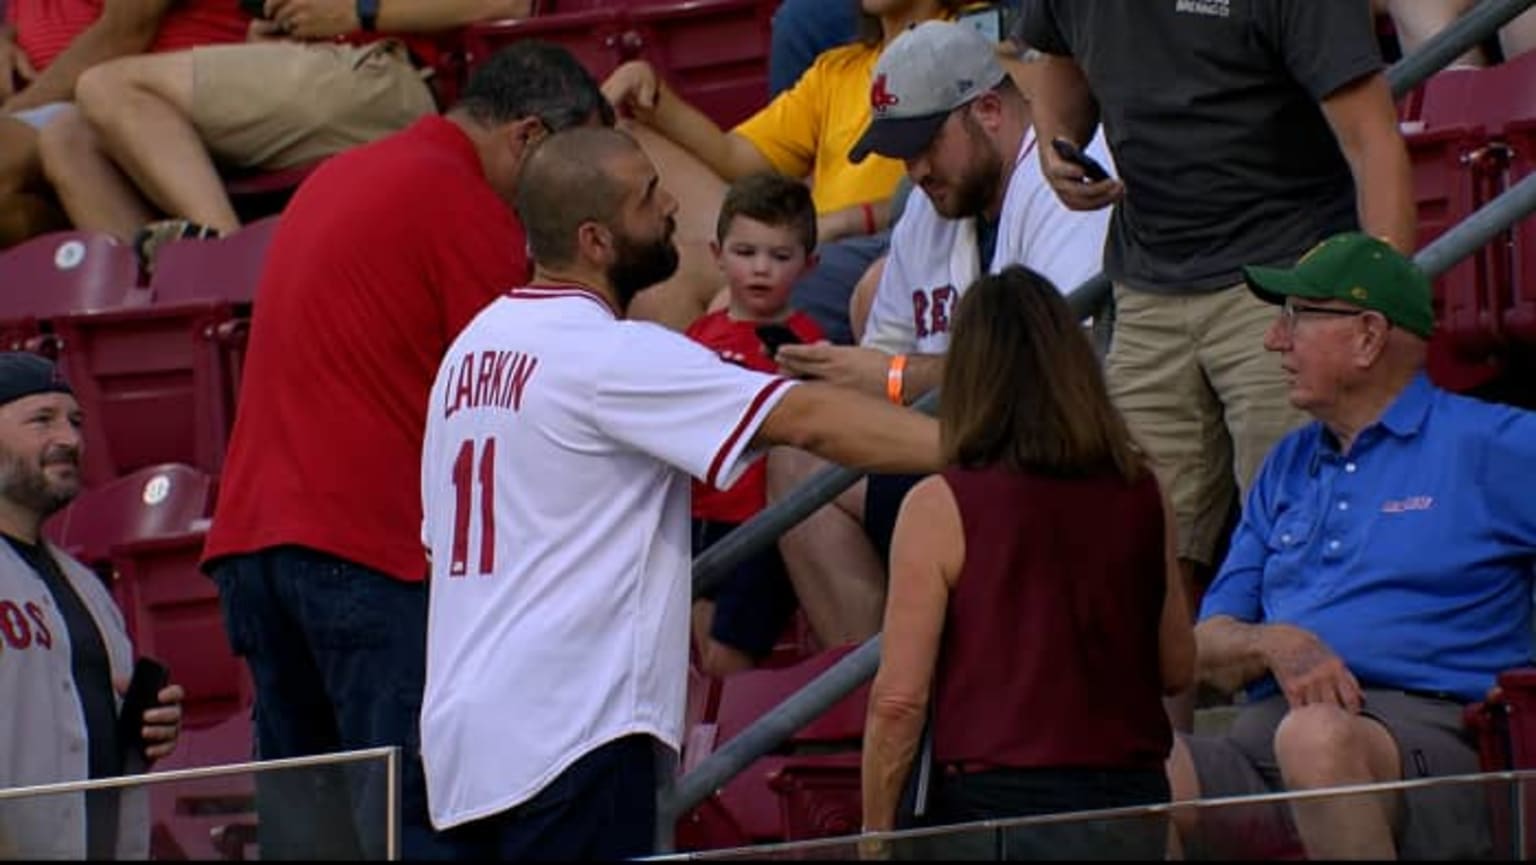 Reds first baseman Joey Votto, wearing a Barry Larkin jersey, talks with fans in the stands during a game